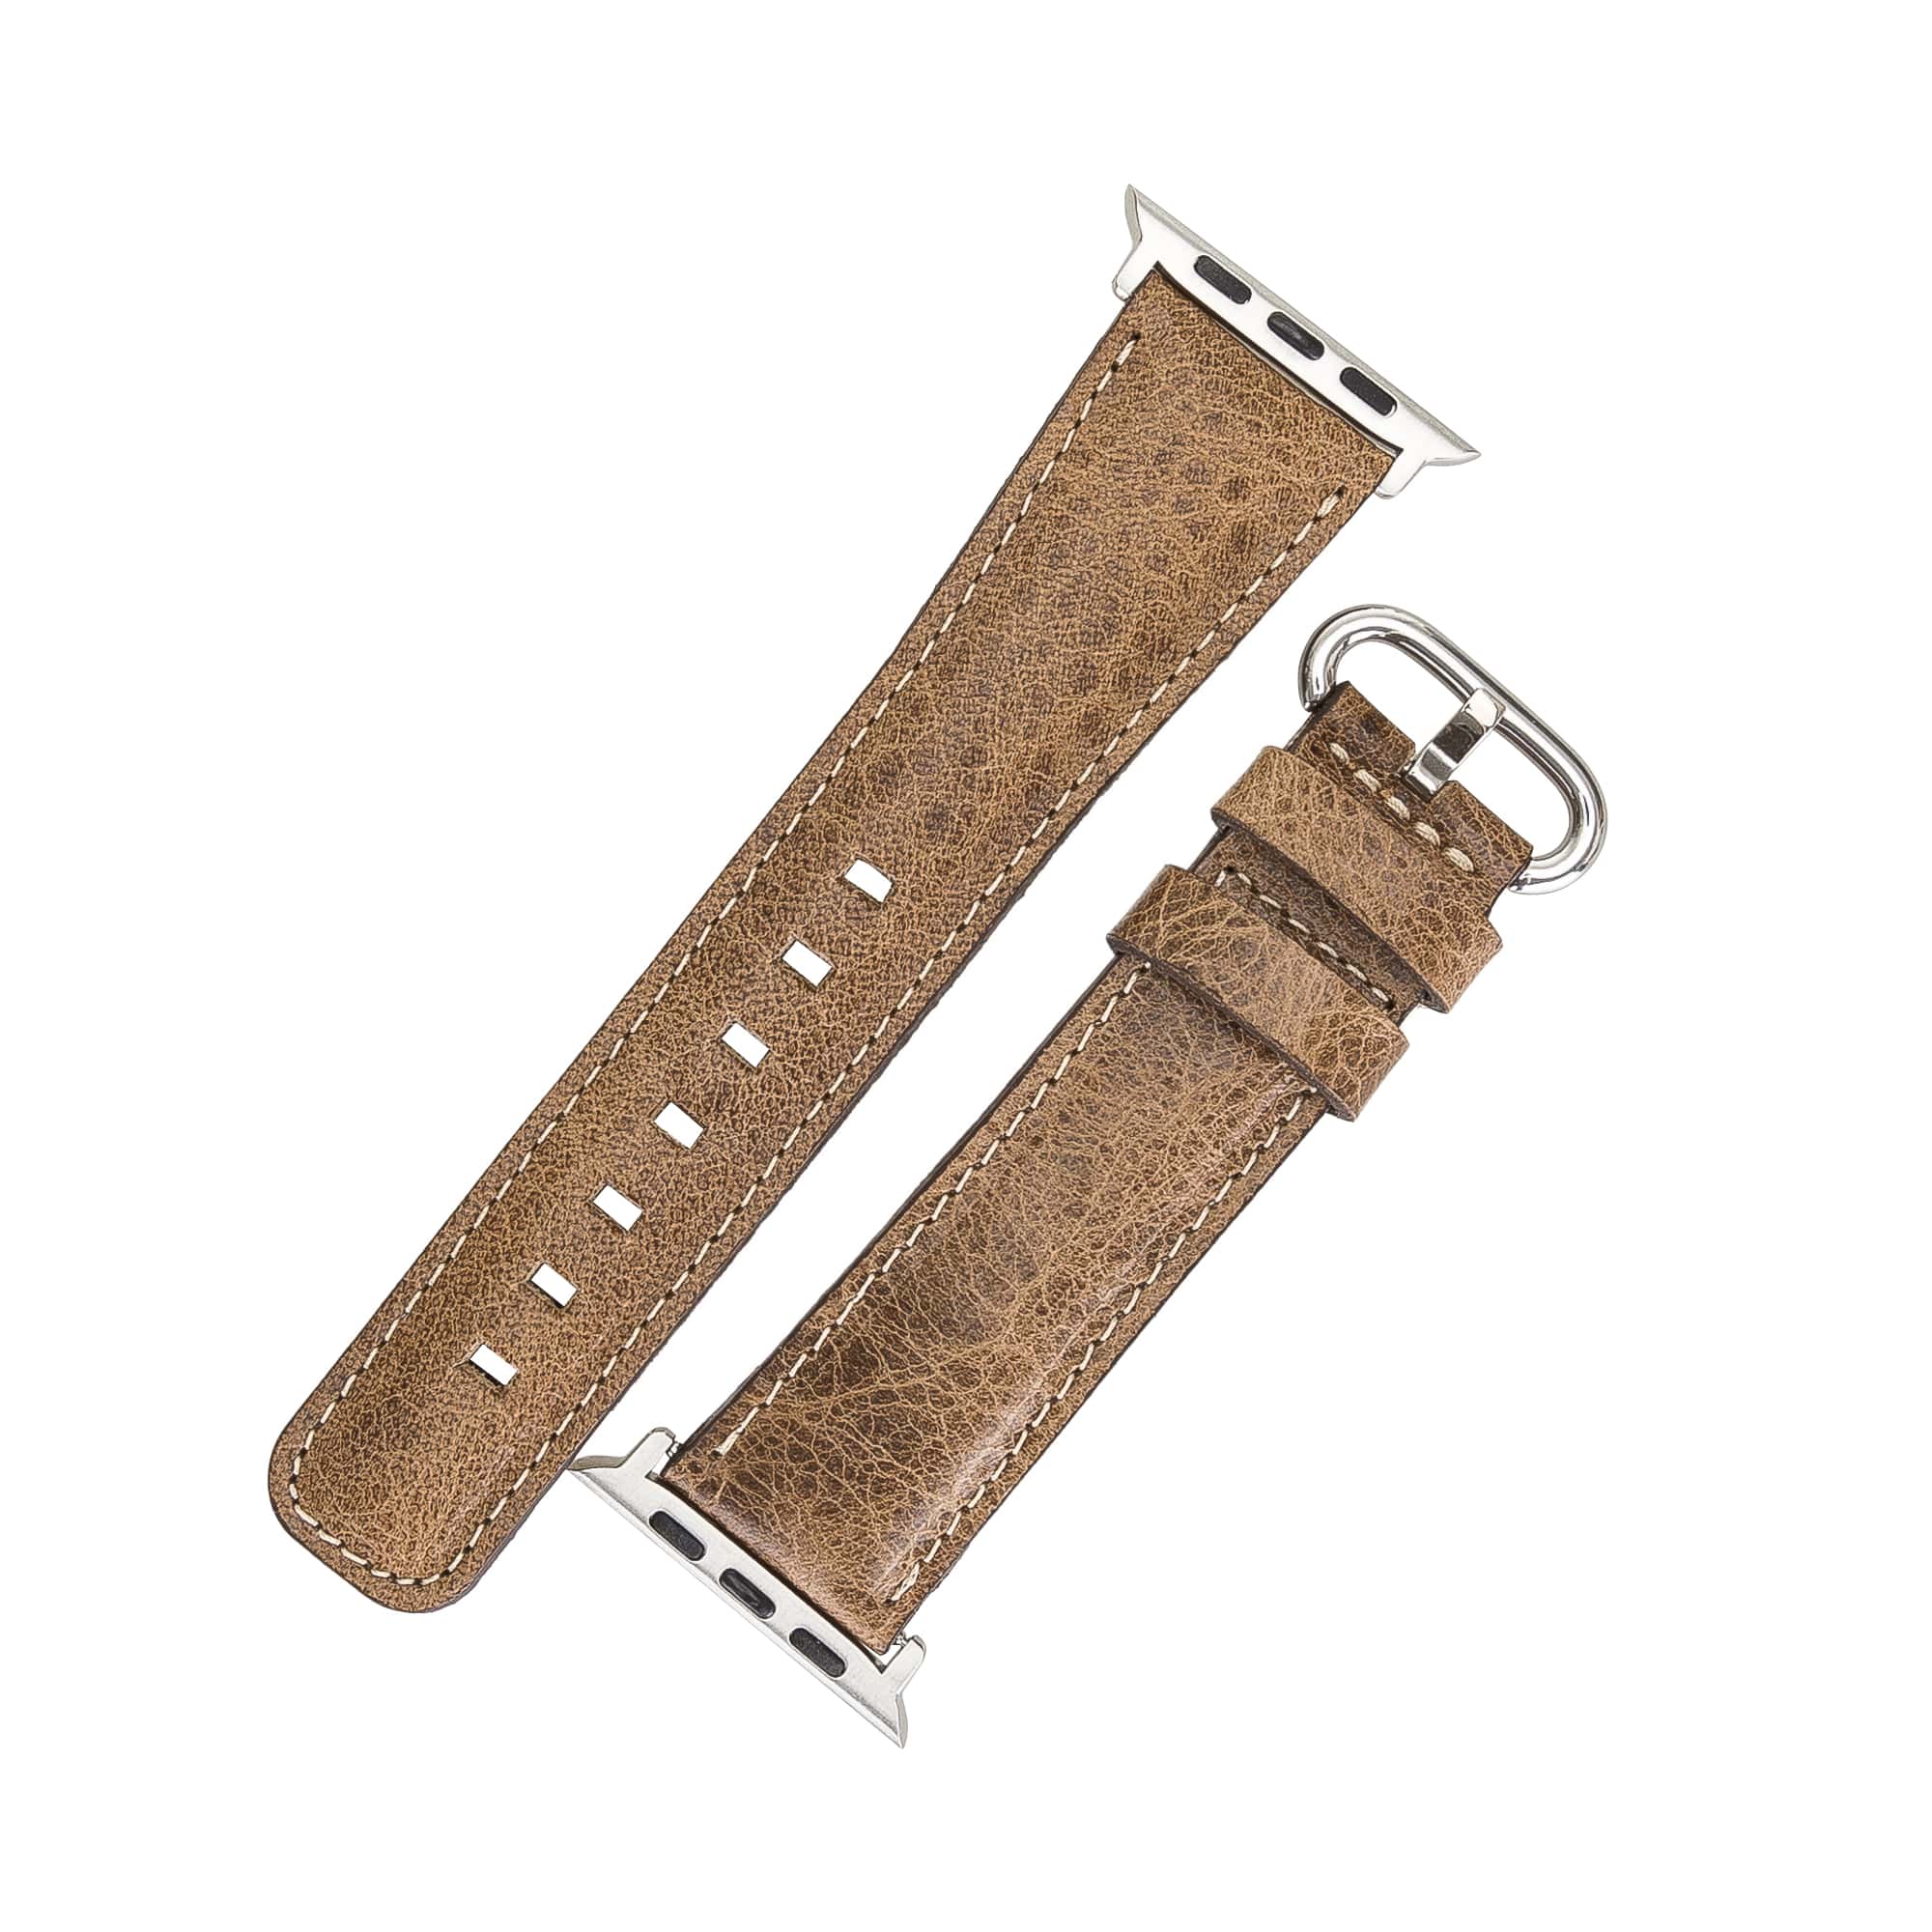 Birmingham Classic Brown Leather Apple Watch Band Strap 38mm 40mm 42mm 44mm 45mm for All Series - Bomonti - 4